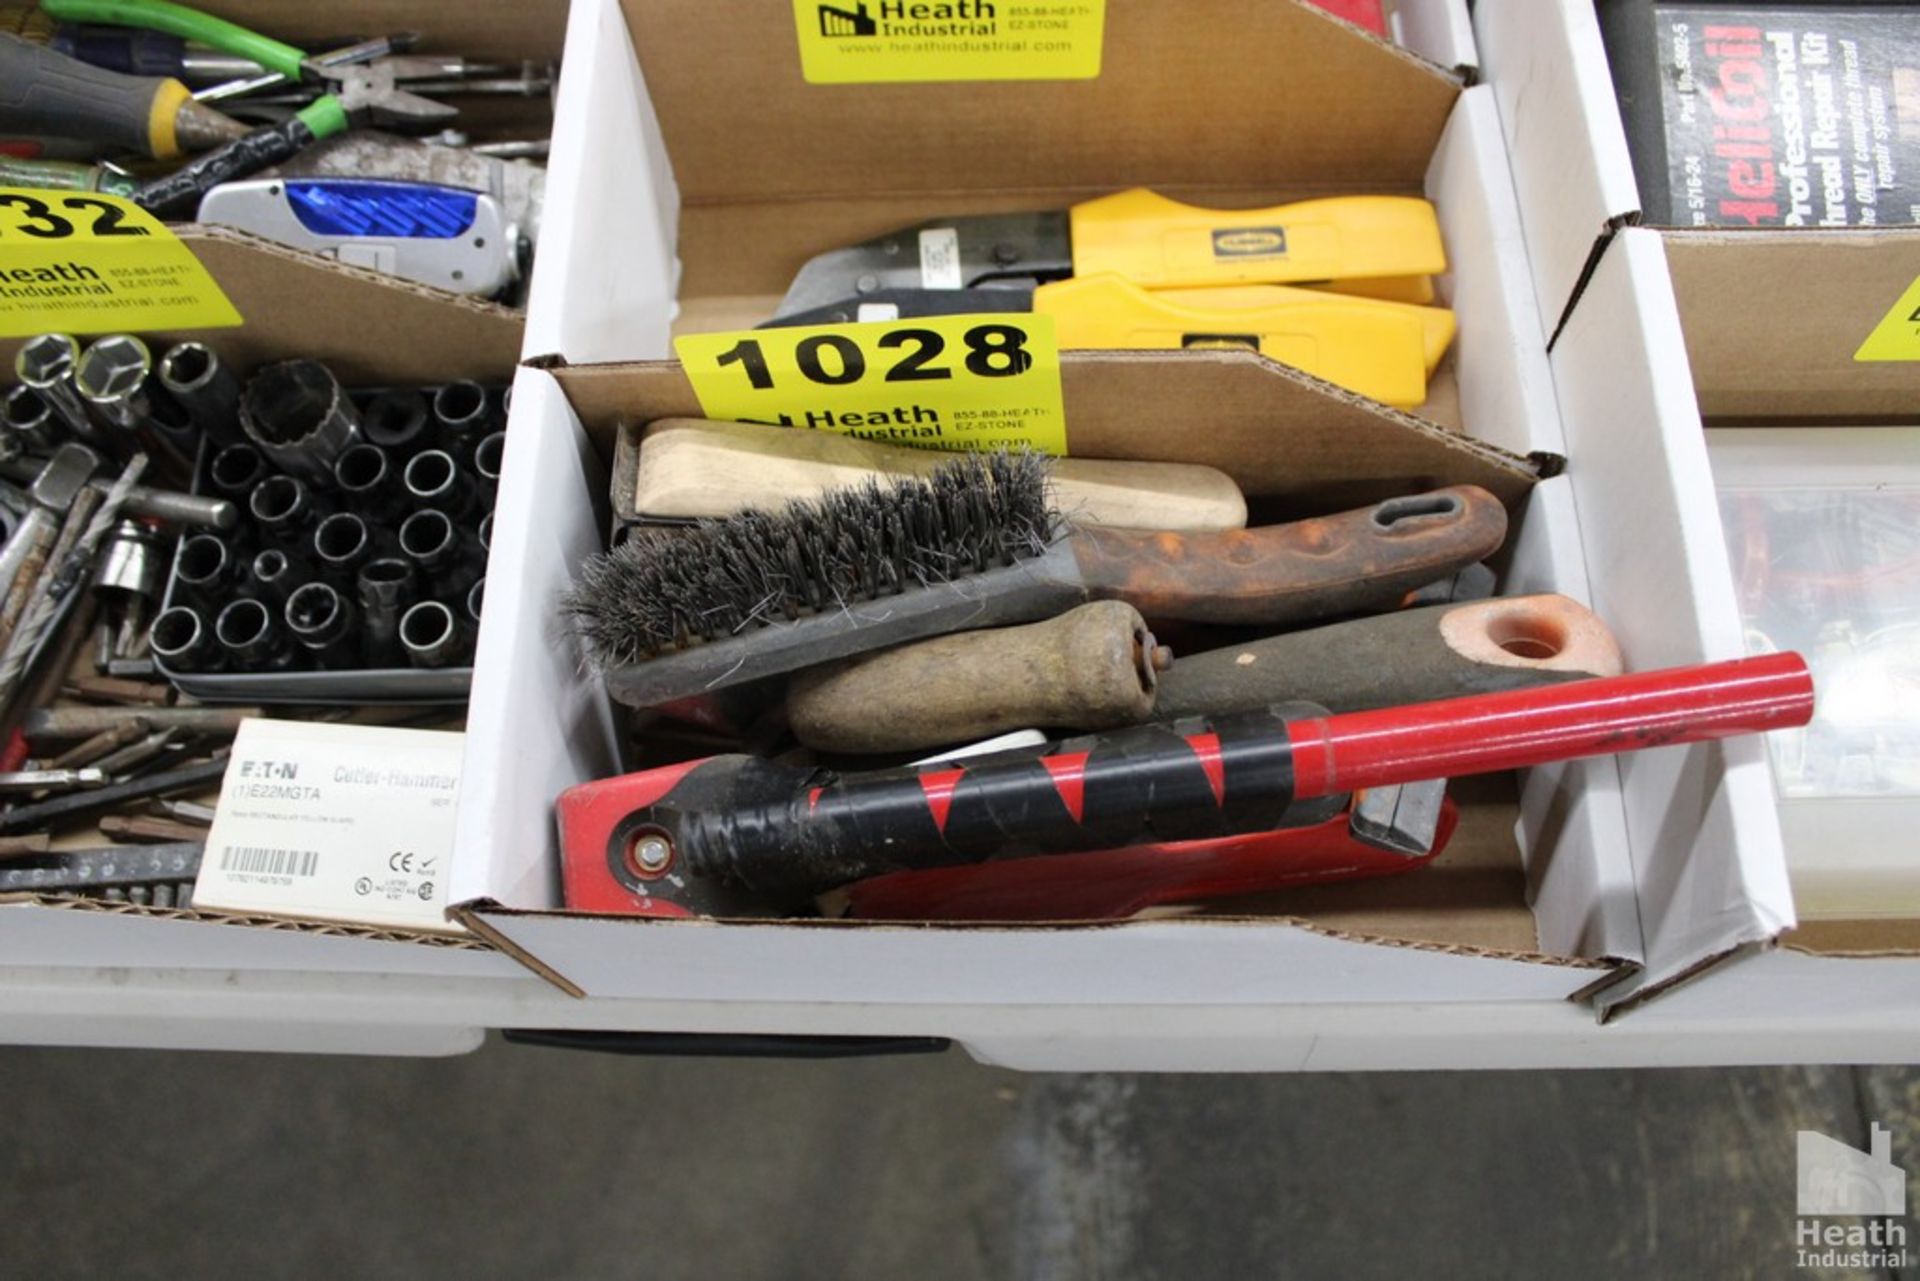 ASSORTED SCRAPPERS IN BOX